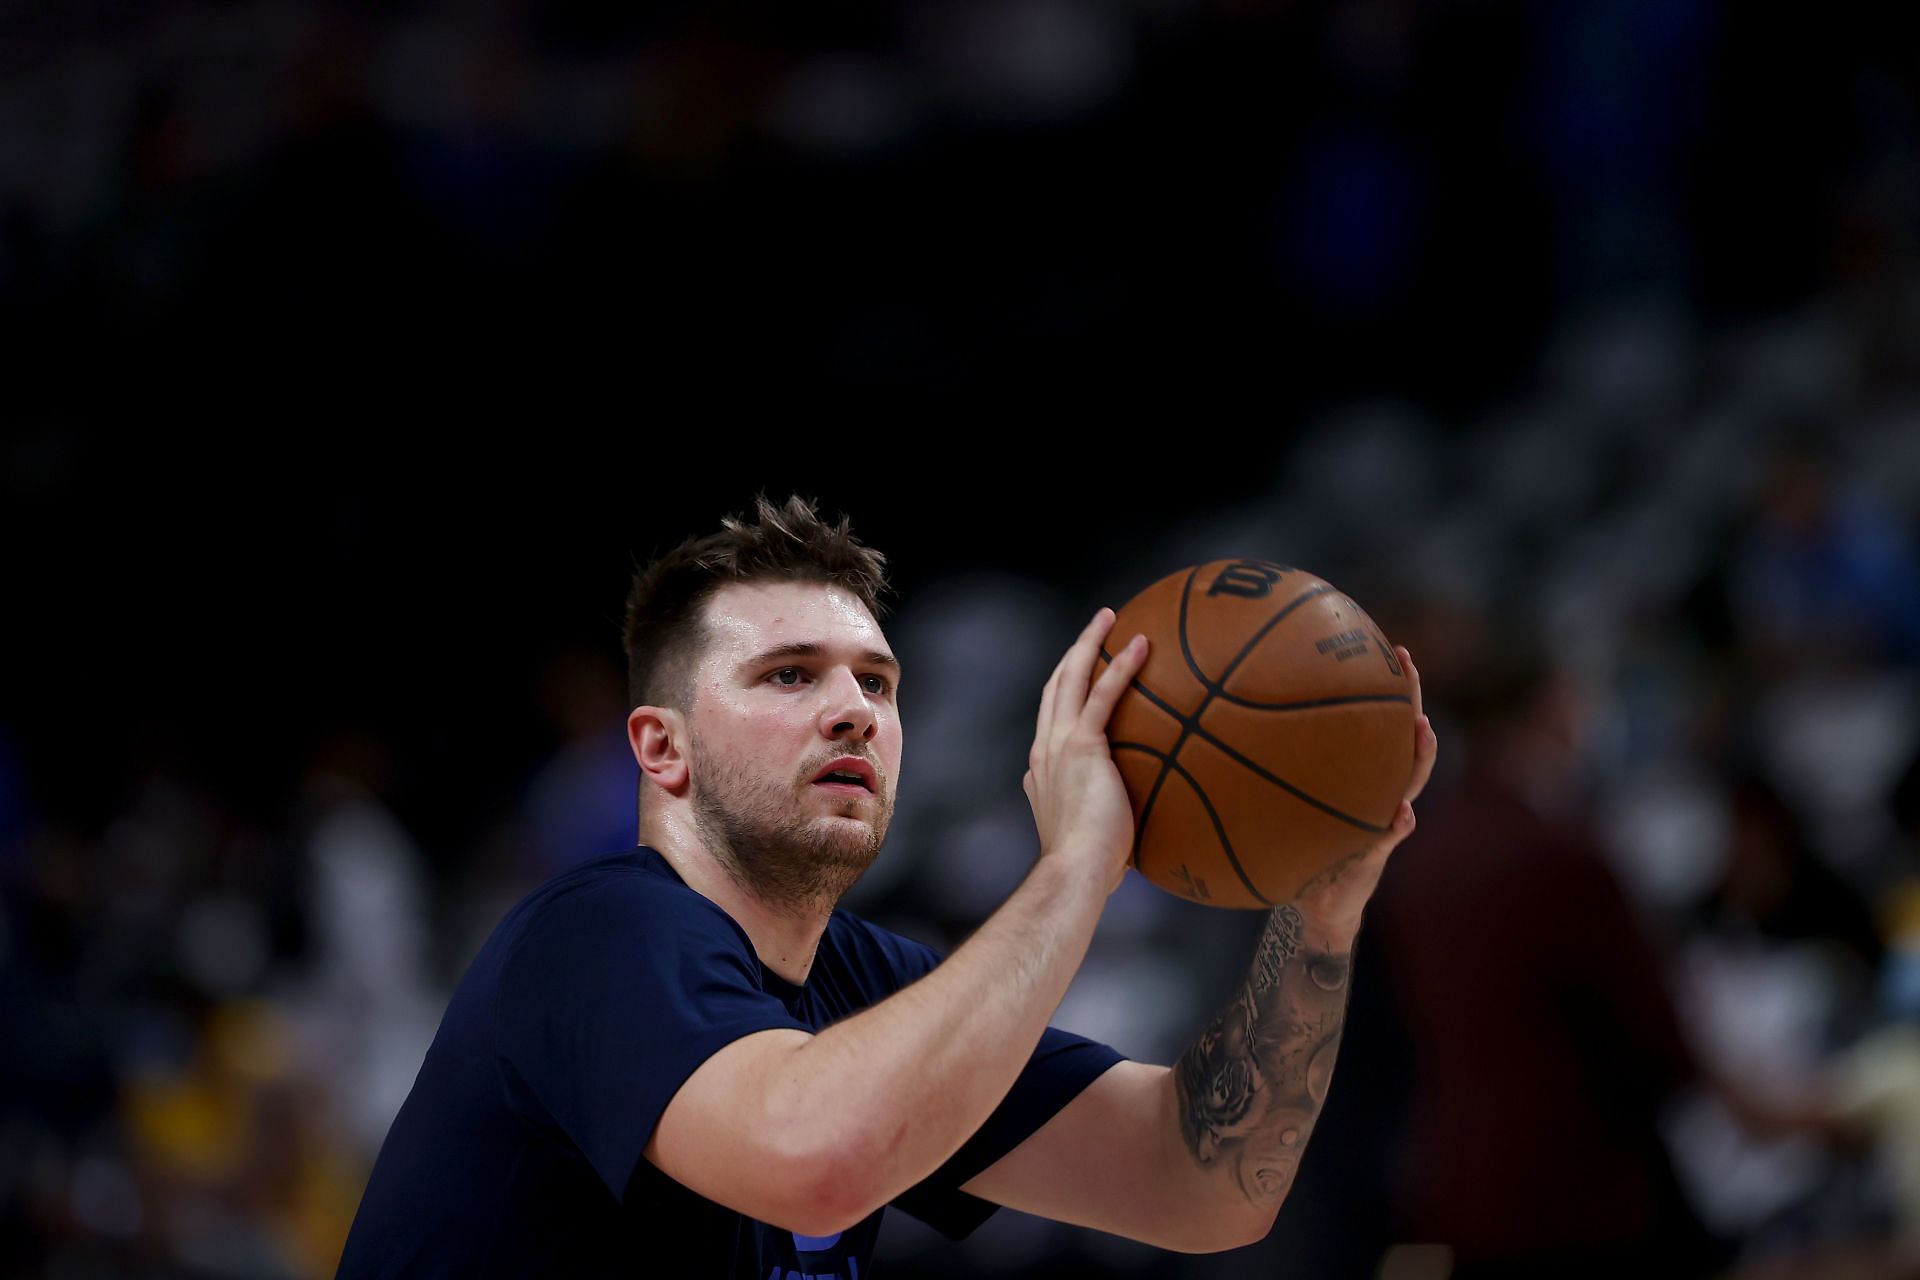 Luka Doncic will continue to be sidelined for the Dallas Mavericks